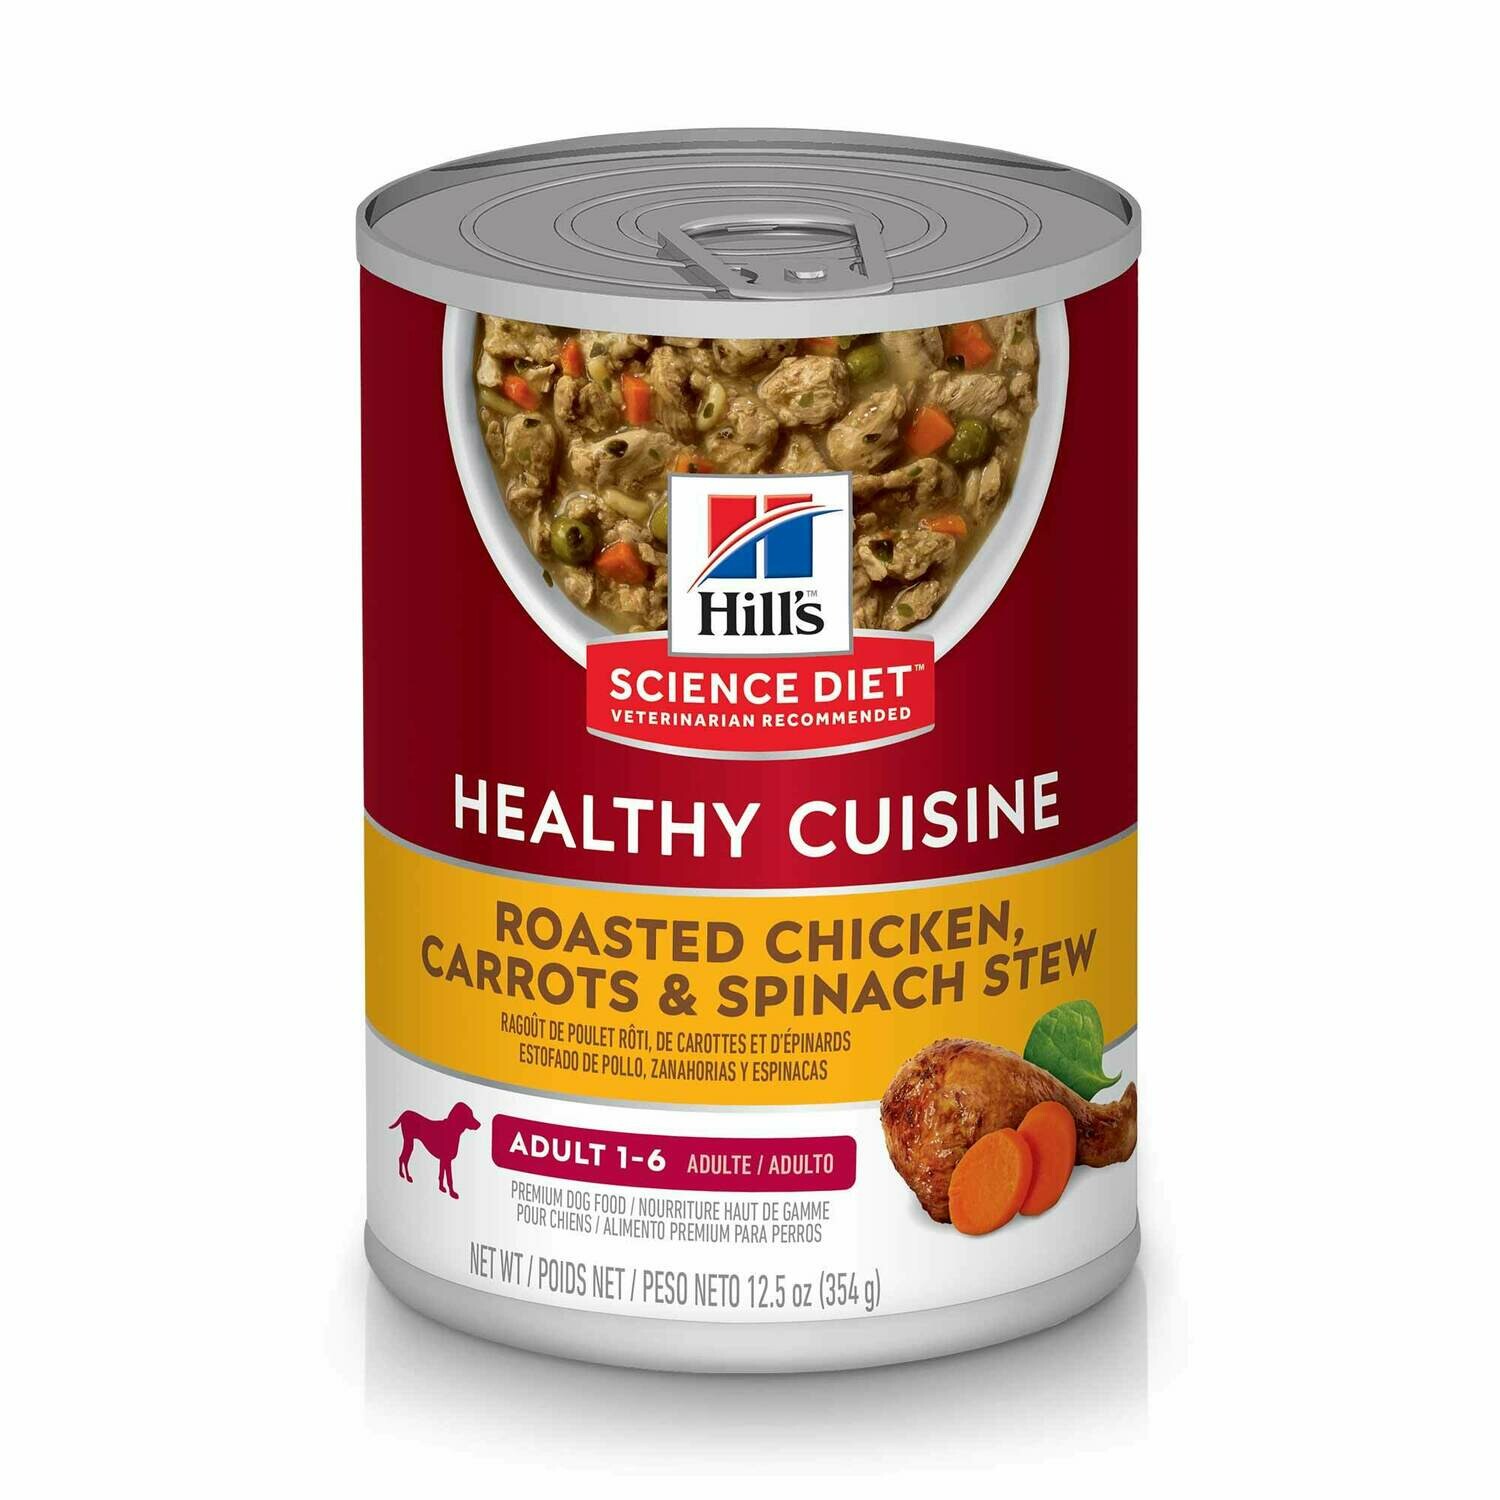 SCIENCE DIET HEALTHY CUISINE ROASTED CHICKEN AND SPINACH STEW 12.5OZ CAN